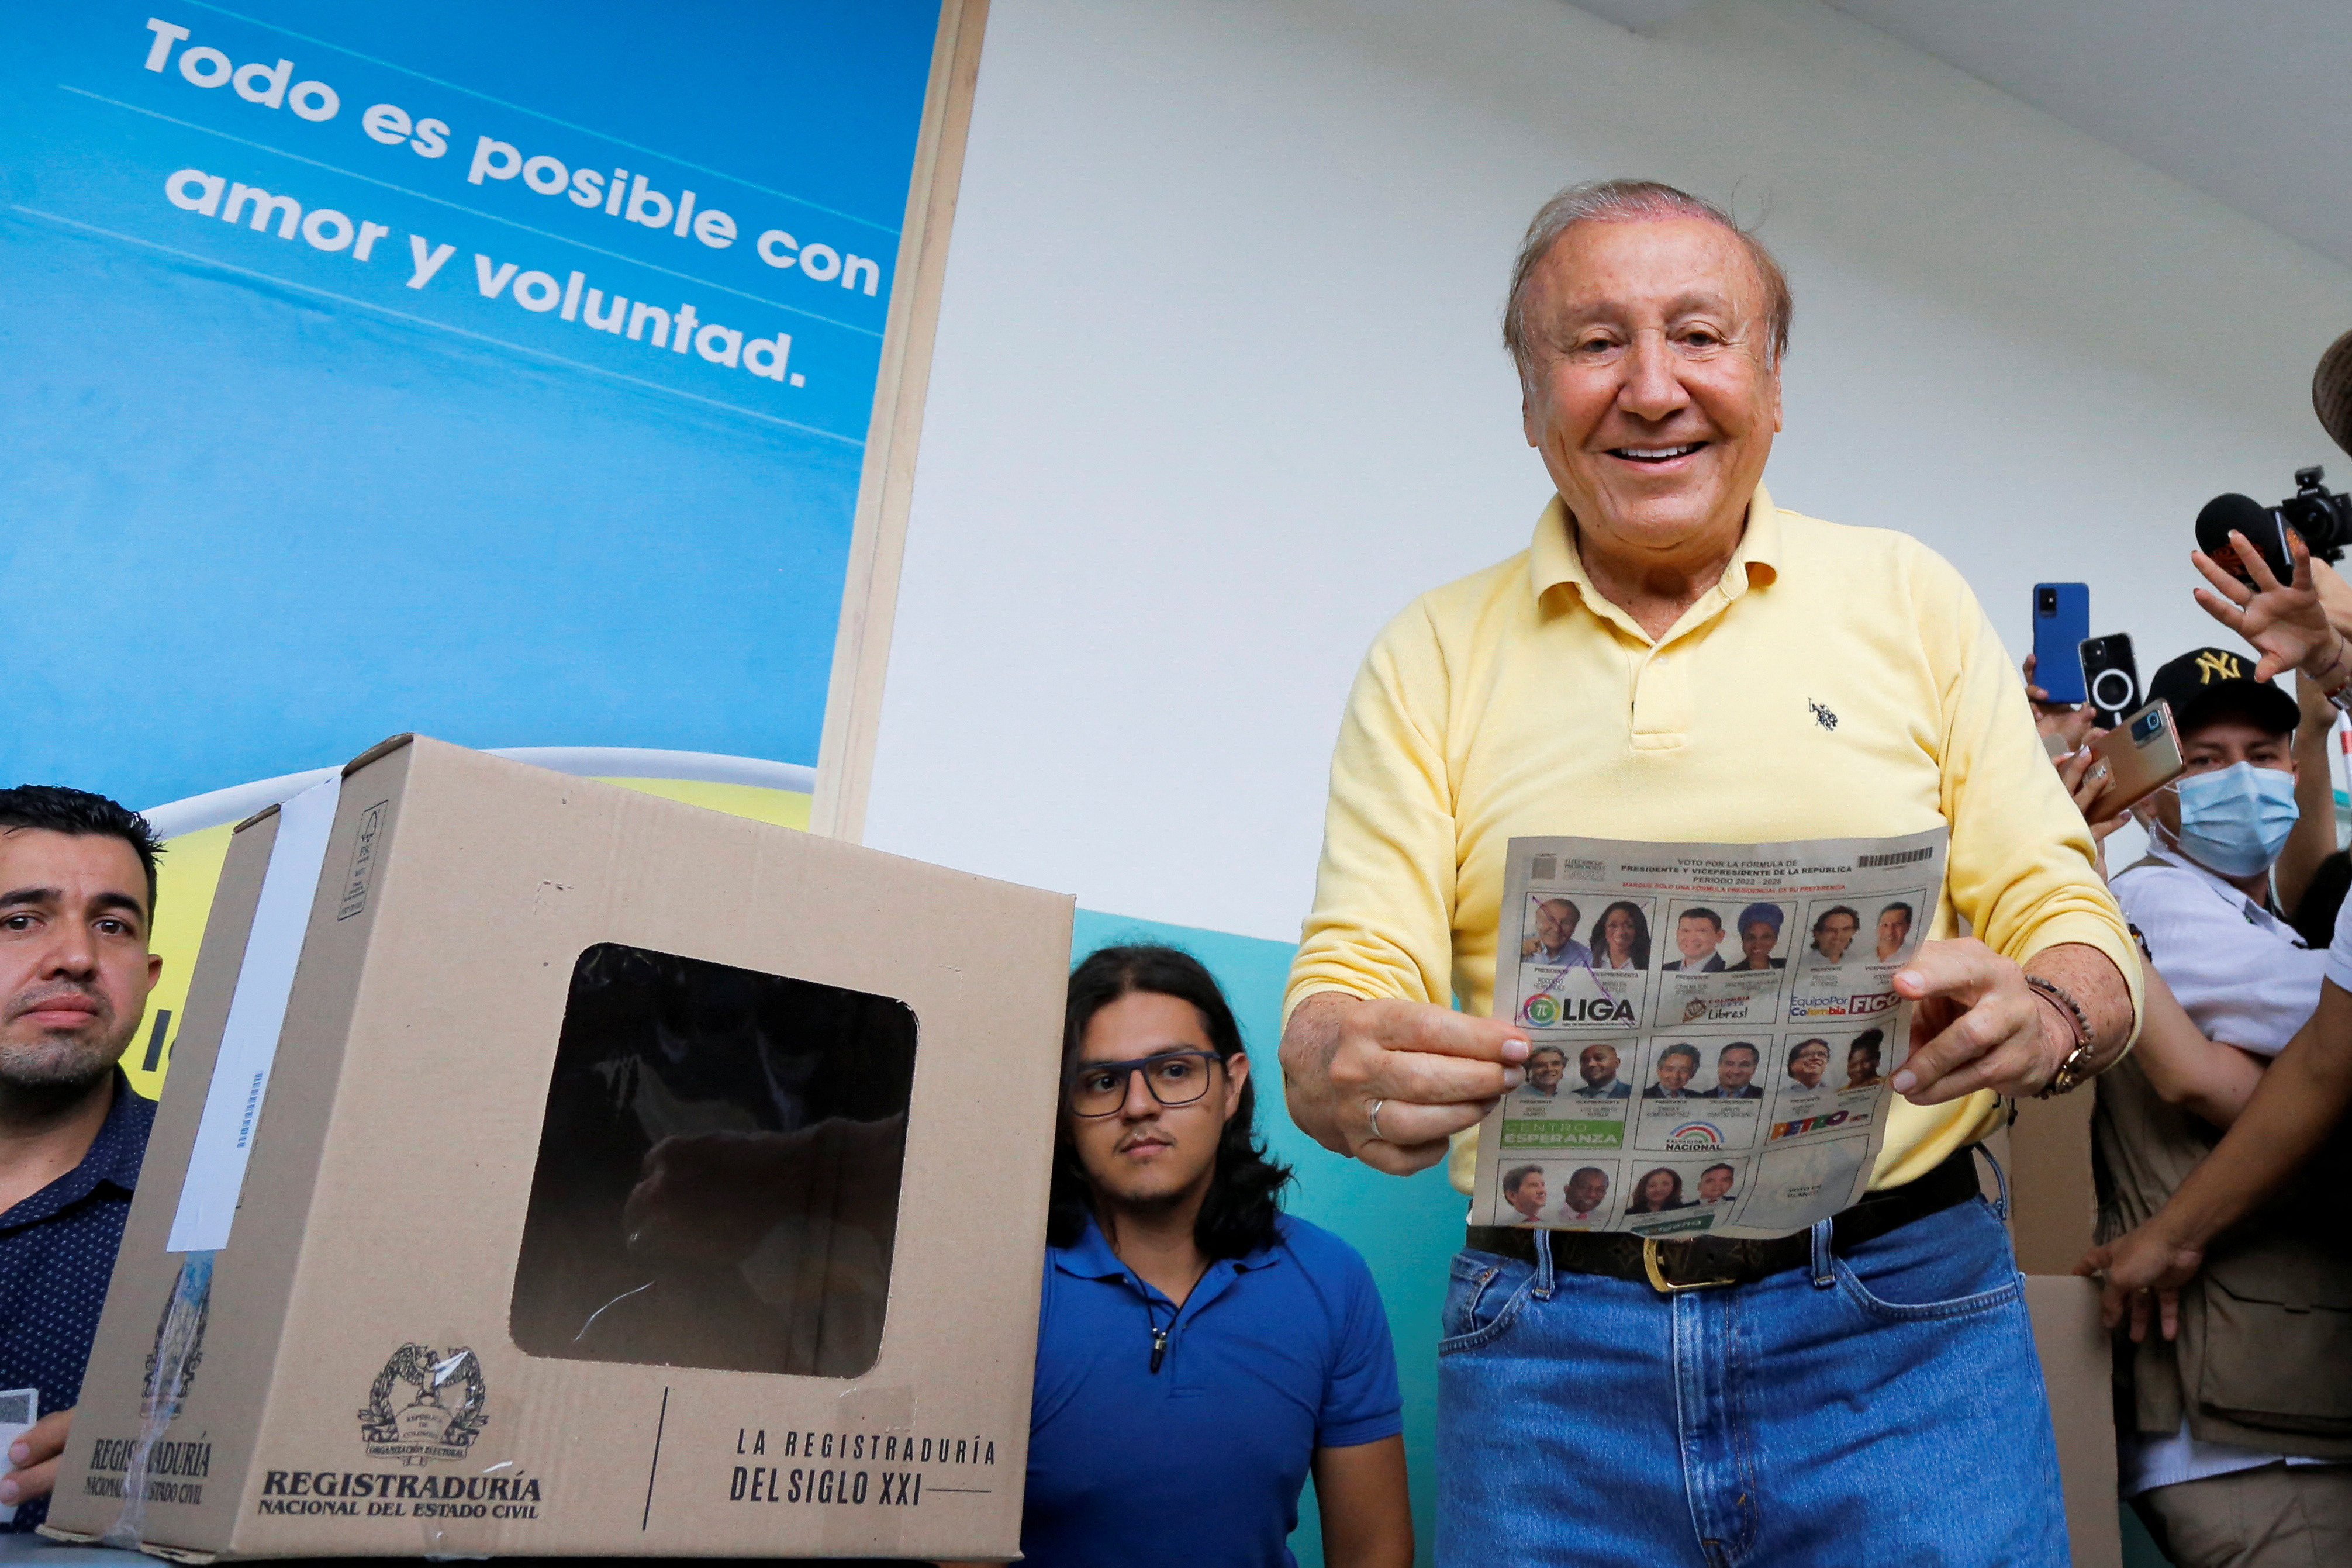 Colombians head to polls in divisive presidential contest